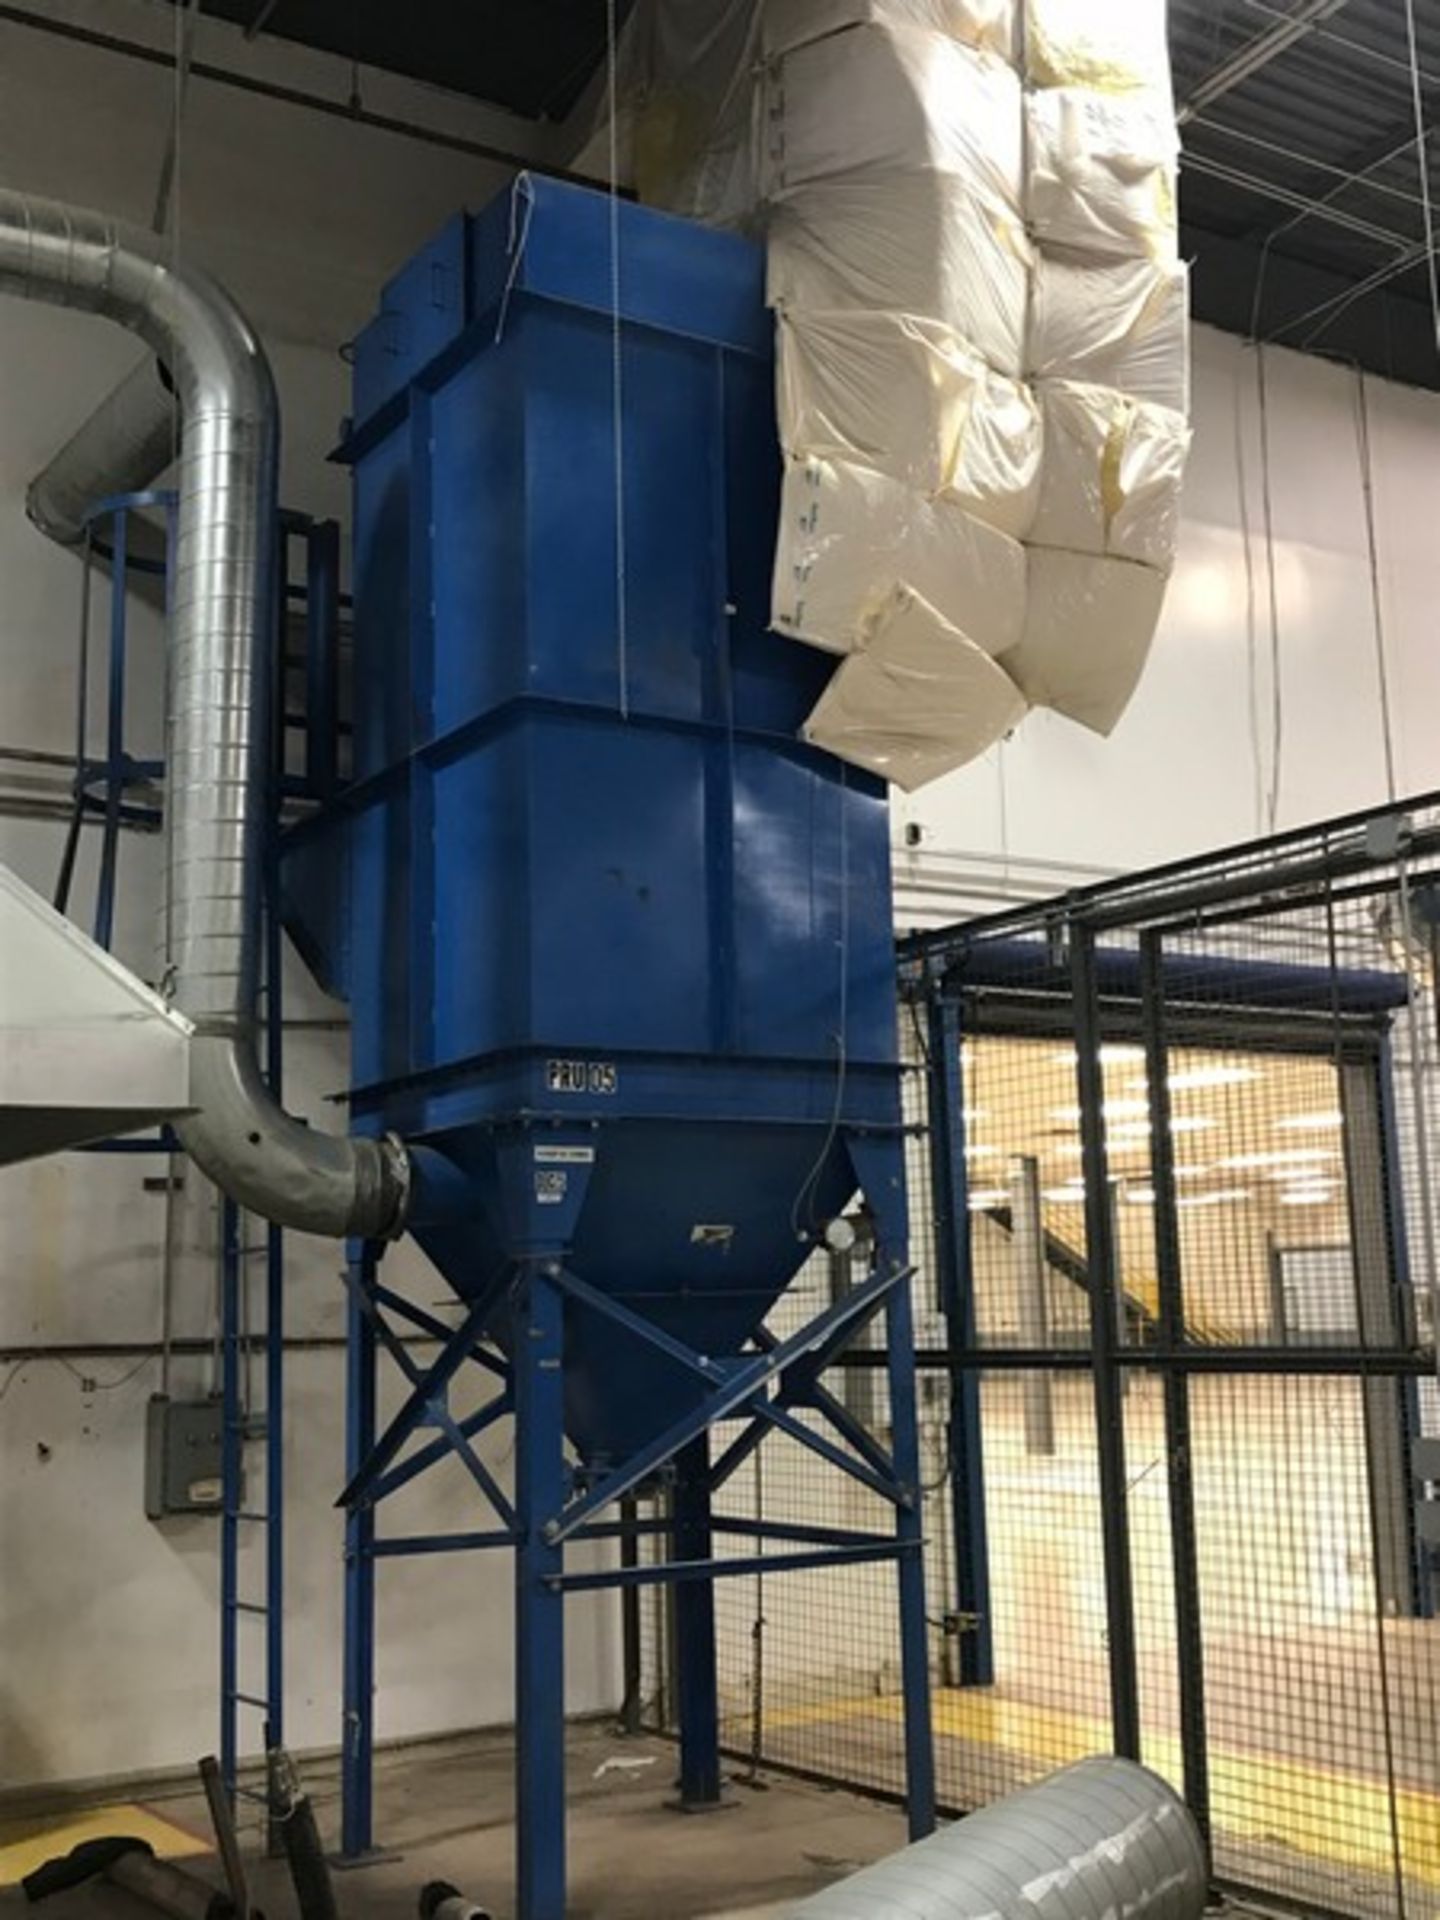 Mikro Pulsaire Dust Collector, Model 49S8ZOC, Serial # 860Z4ZHI, pulse jet cleaning with blower